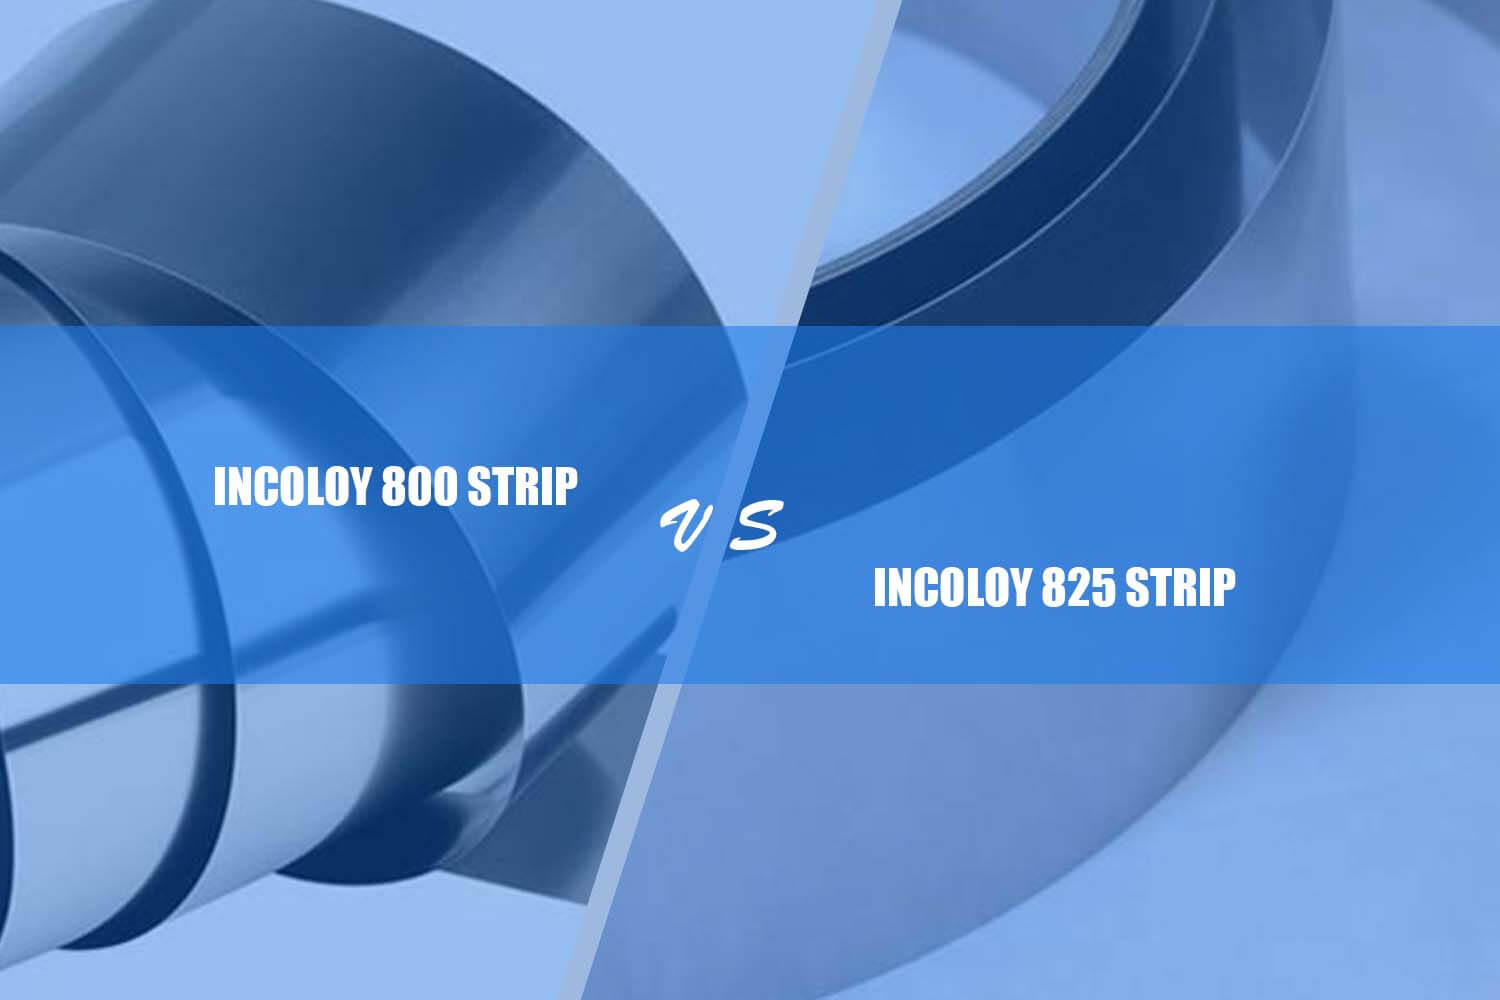 difference between incoloy 800 strip and incoloy 825 조각